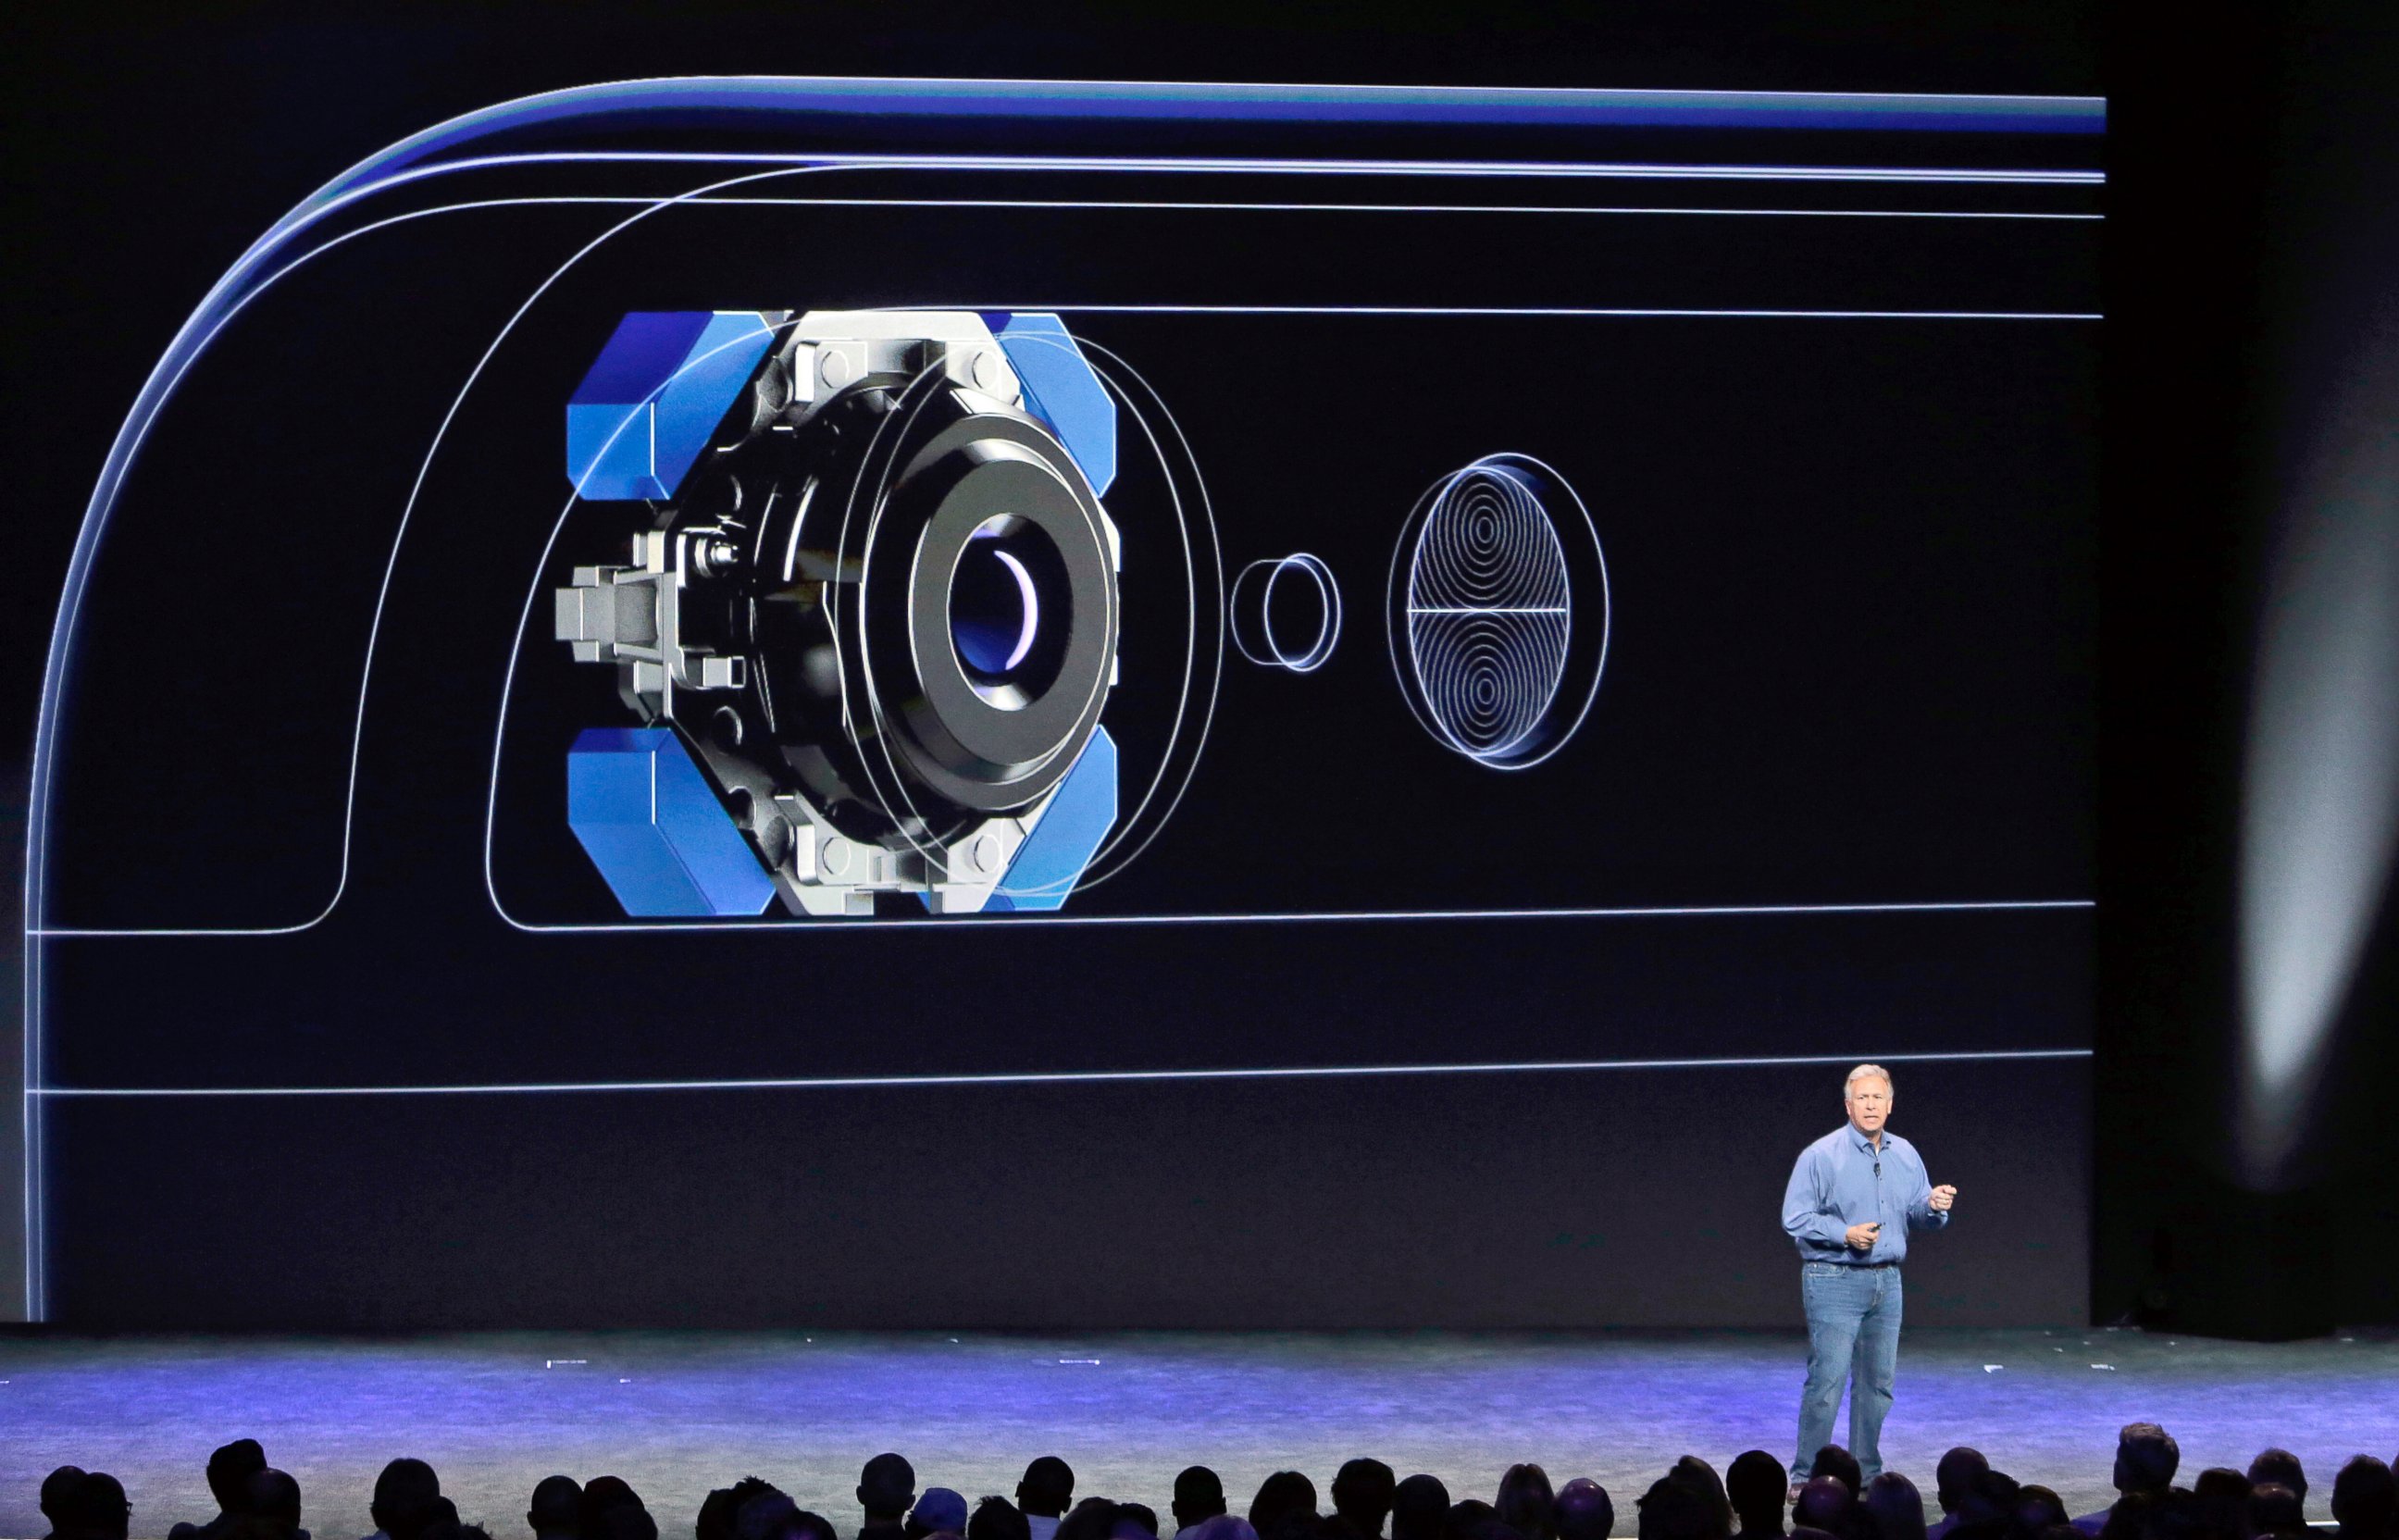 PHOTO: Phil Schiller, Apple's senior vice president of worldwide product marketing, discusses the camera features on the new iPhone 6 and iPhone 6 plus, Sept. 9, 2014, in Cupertino, Calif.